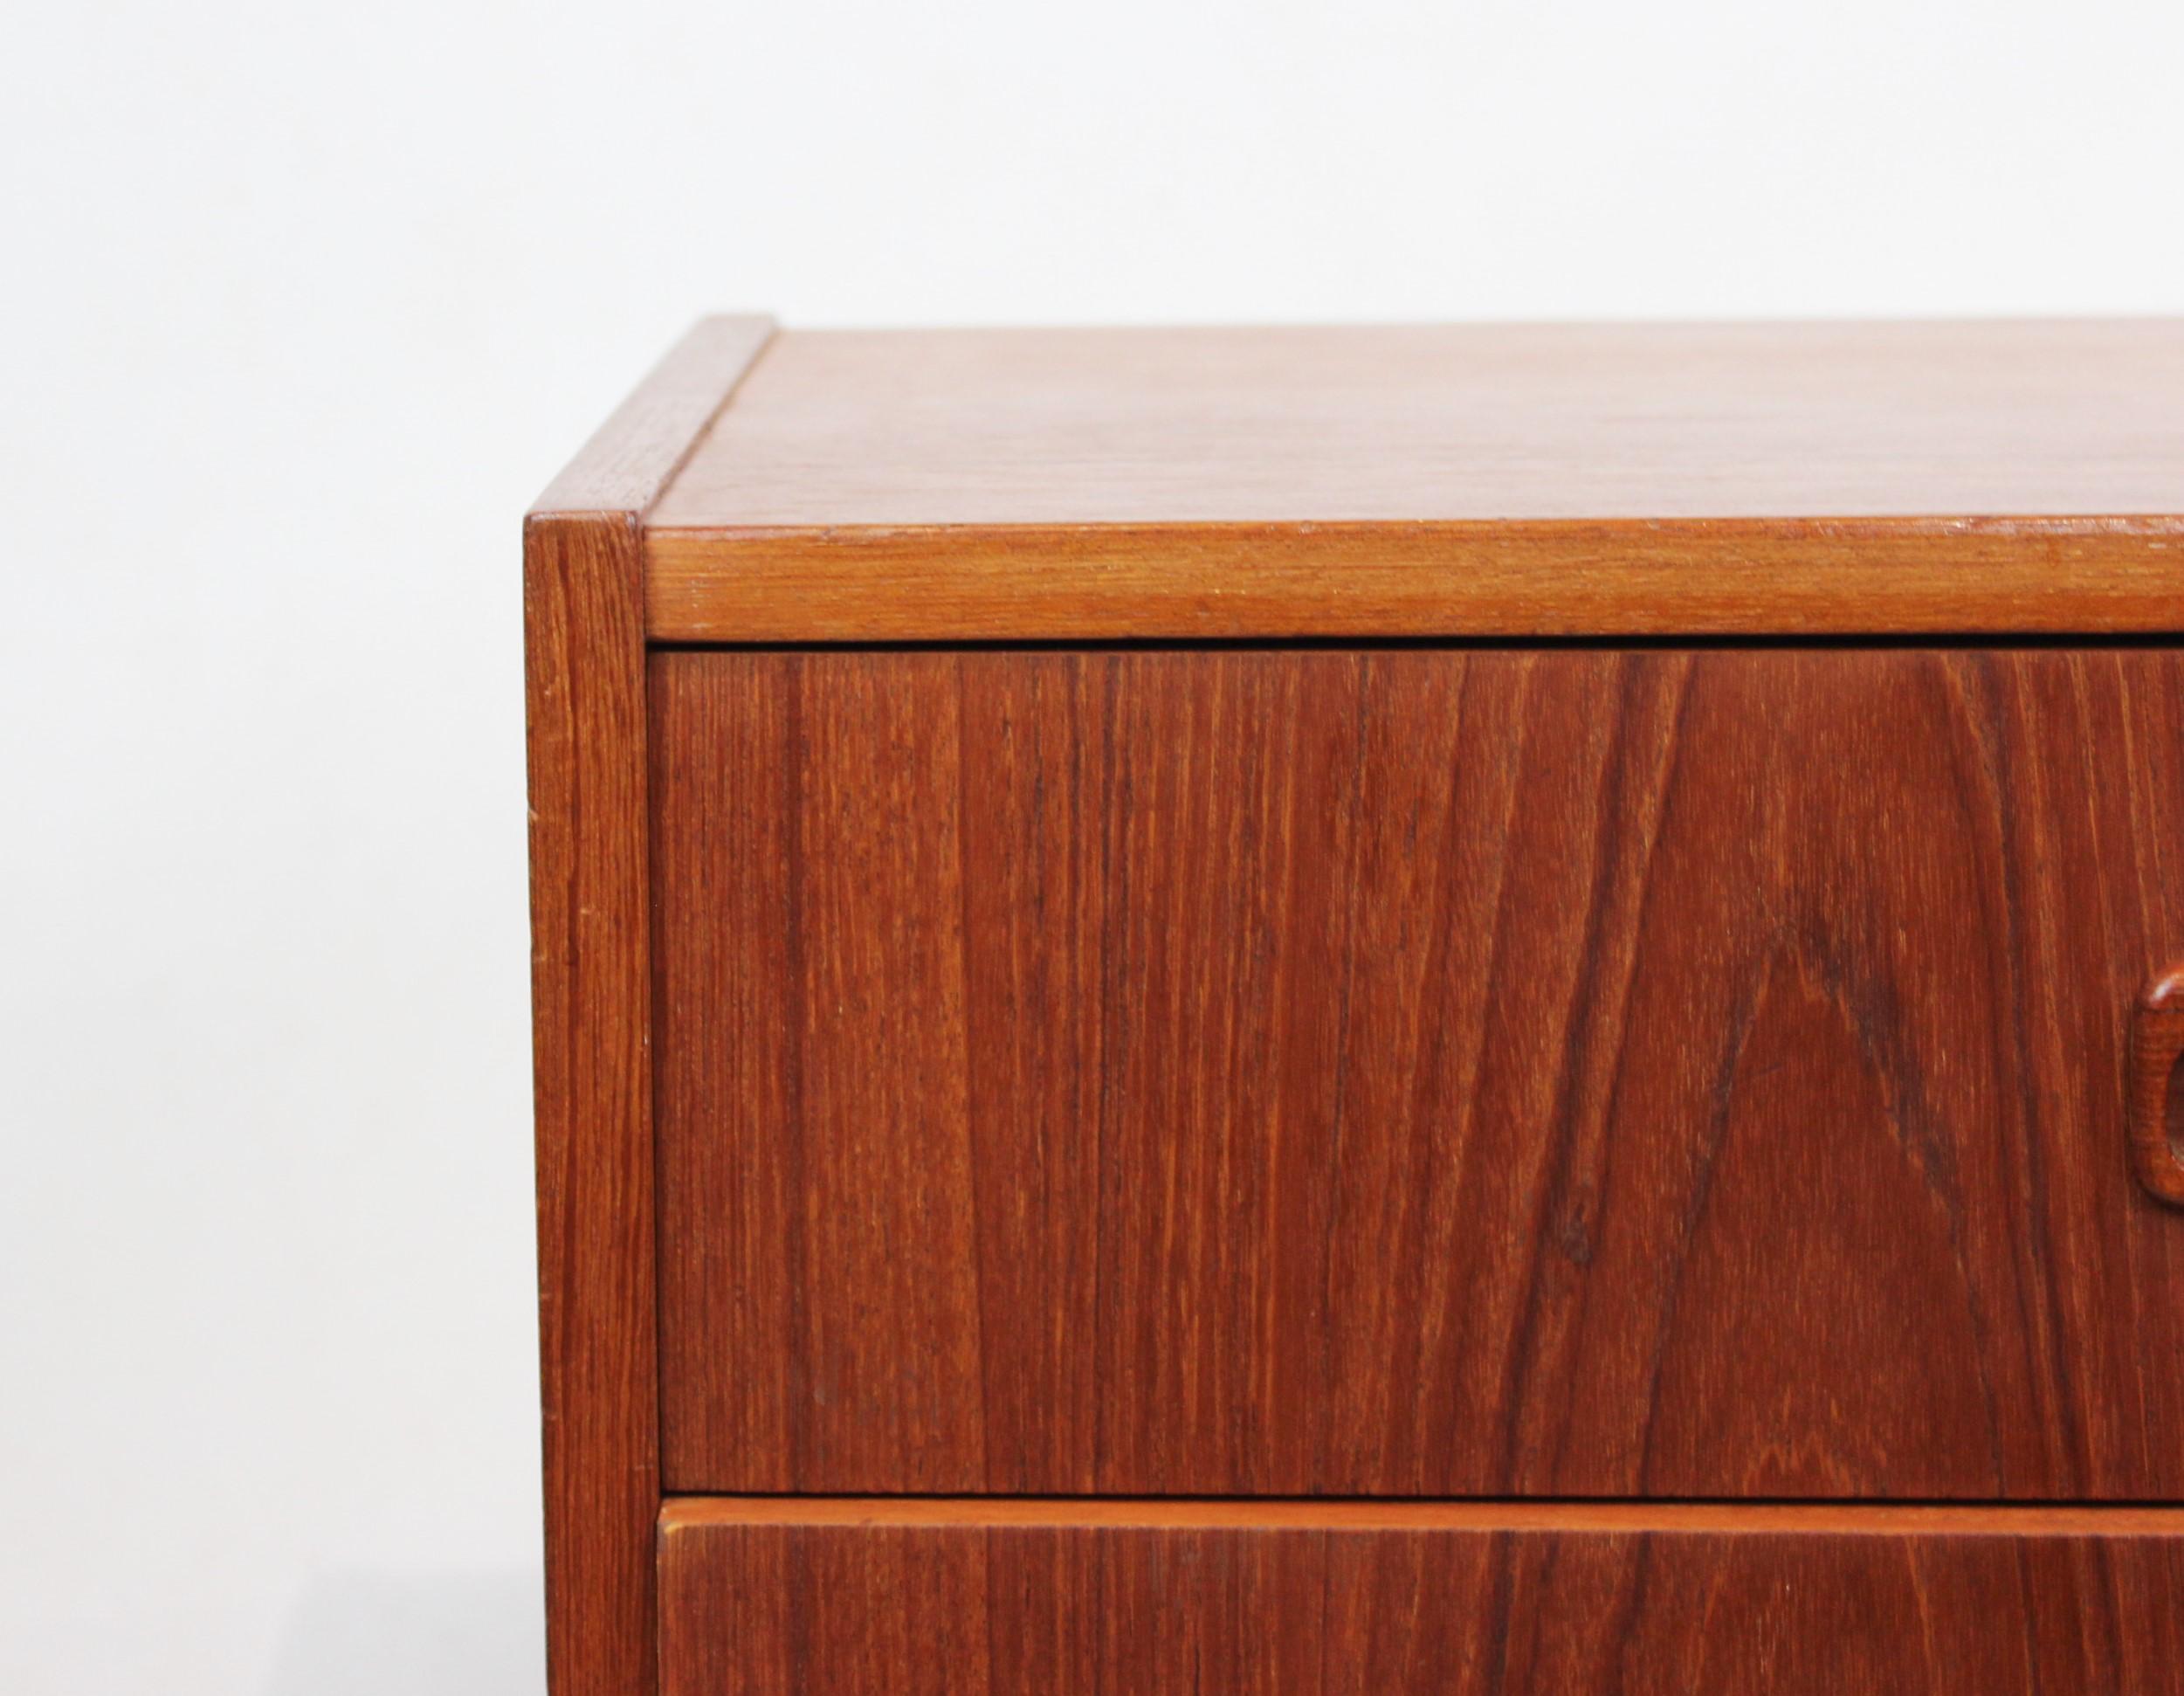 The small chest of drawers in teak, crafted in the 1960s, epitomizes Danish design excellence. With its sleek lines and warm teak wood, this piece exudes mid-century modern charm. Perfect for adding storage and style to any space, it showcases the